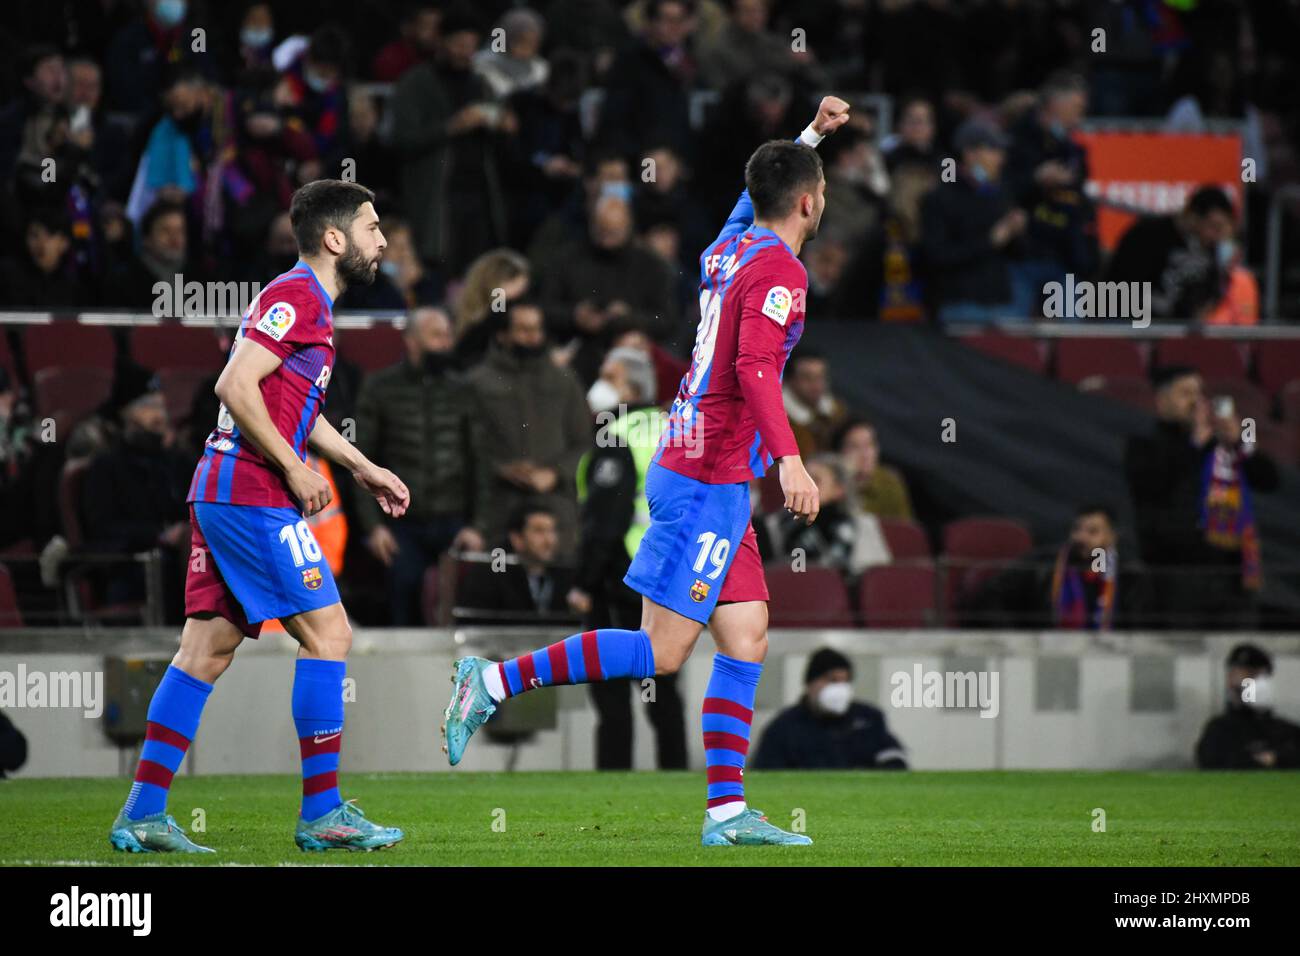 BARCELONA, SPAIN - MARCH 13: Ferran Torres of Barcelona celebrates after scoring a goal (1-0) during La Liga match between Barcelona and Osasuna at Camp Nou stadium on March 13, 2022 in Barcelona, Spain. (Photo by Sara Aribó/Pximages) Stock Photo